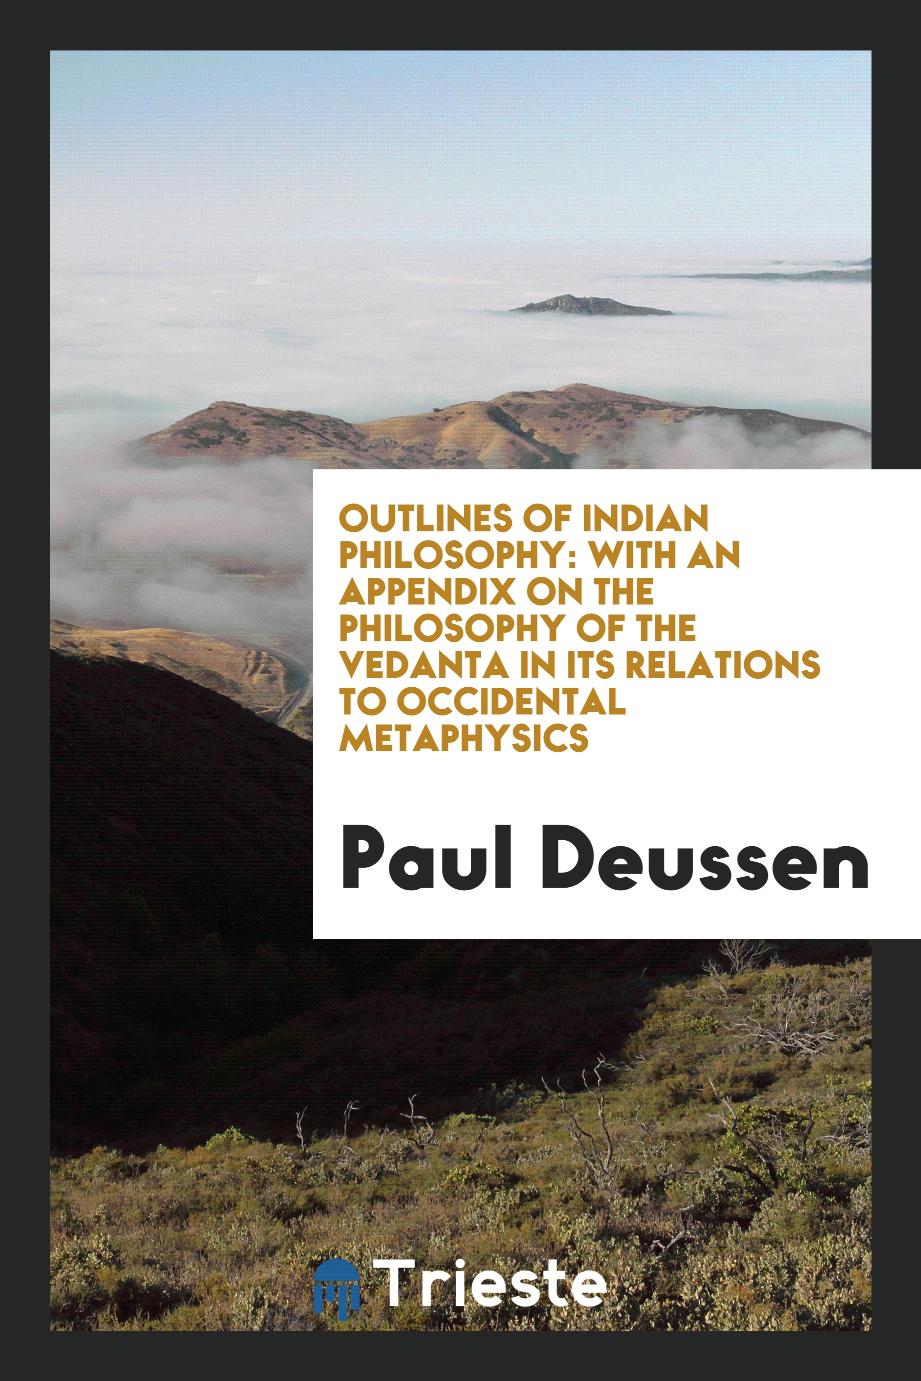 Outlines of Indian Philosophy: with an Appendix on the Philosophy of the Vedanta in its Relations to Occidental Metaphysics